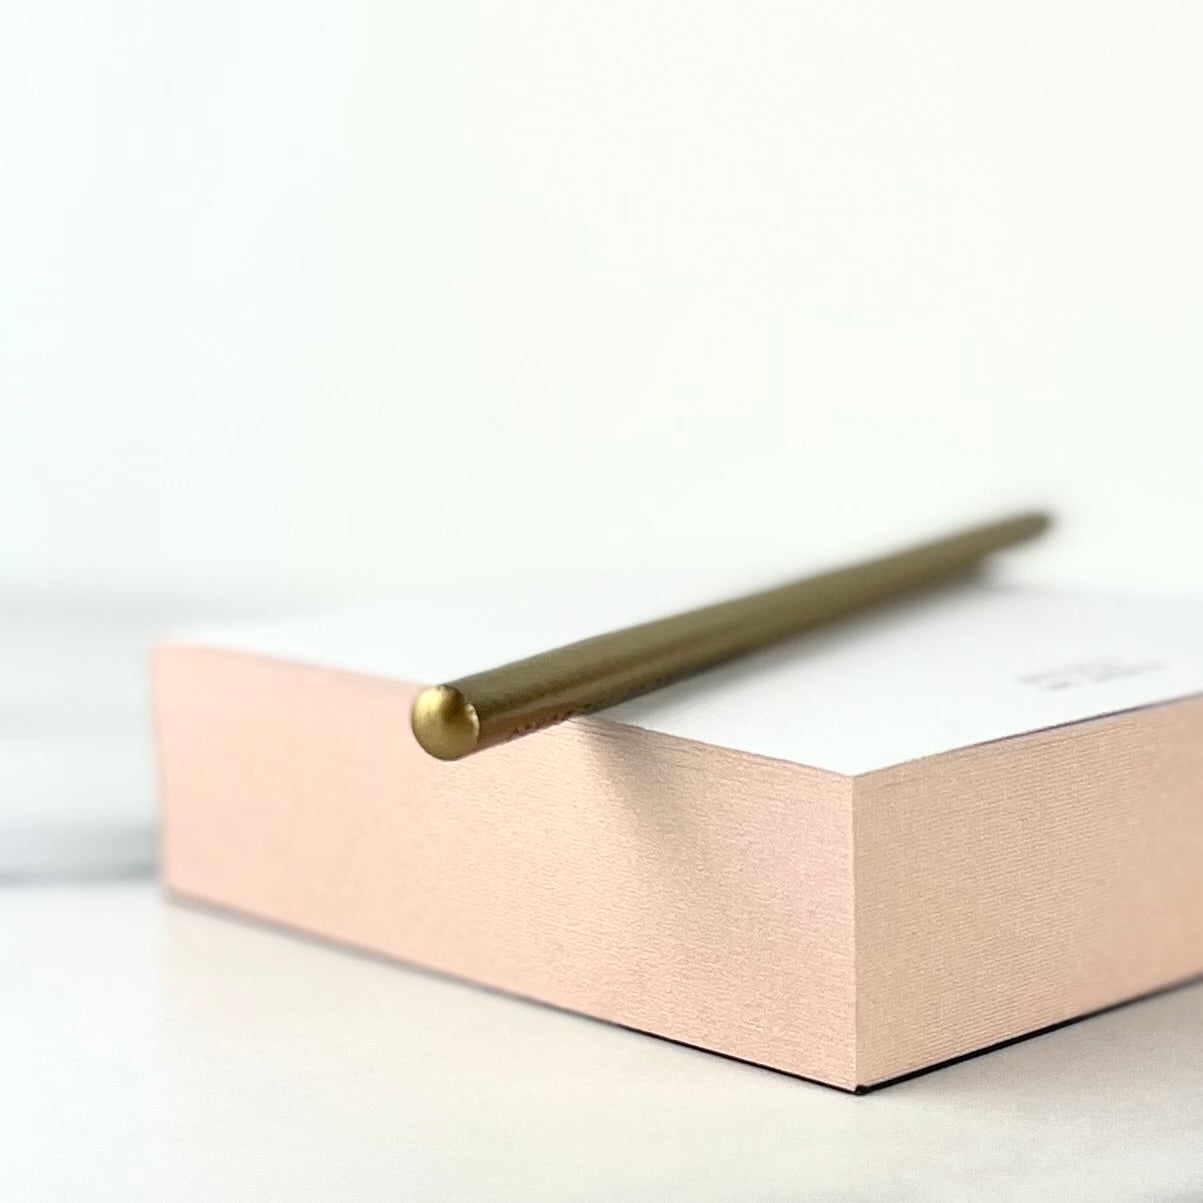 Small Blush-Edged Notepad shown from the side to reveal its blush-pink colored-edges - The Offbeat Co.